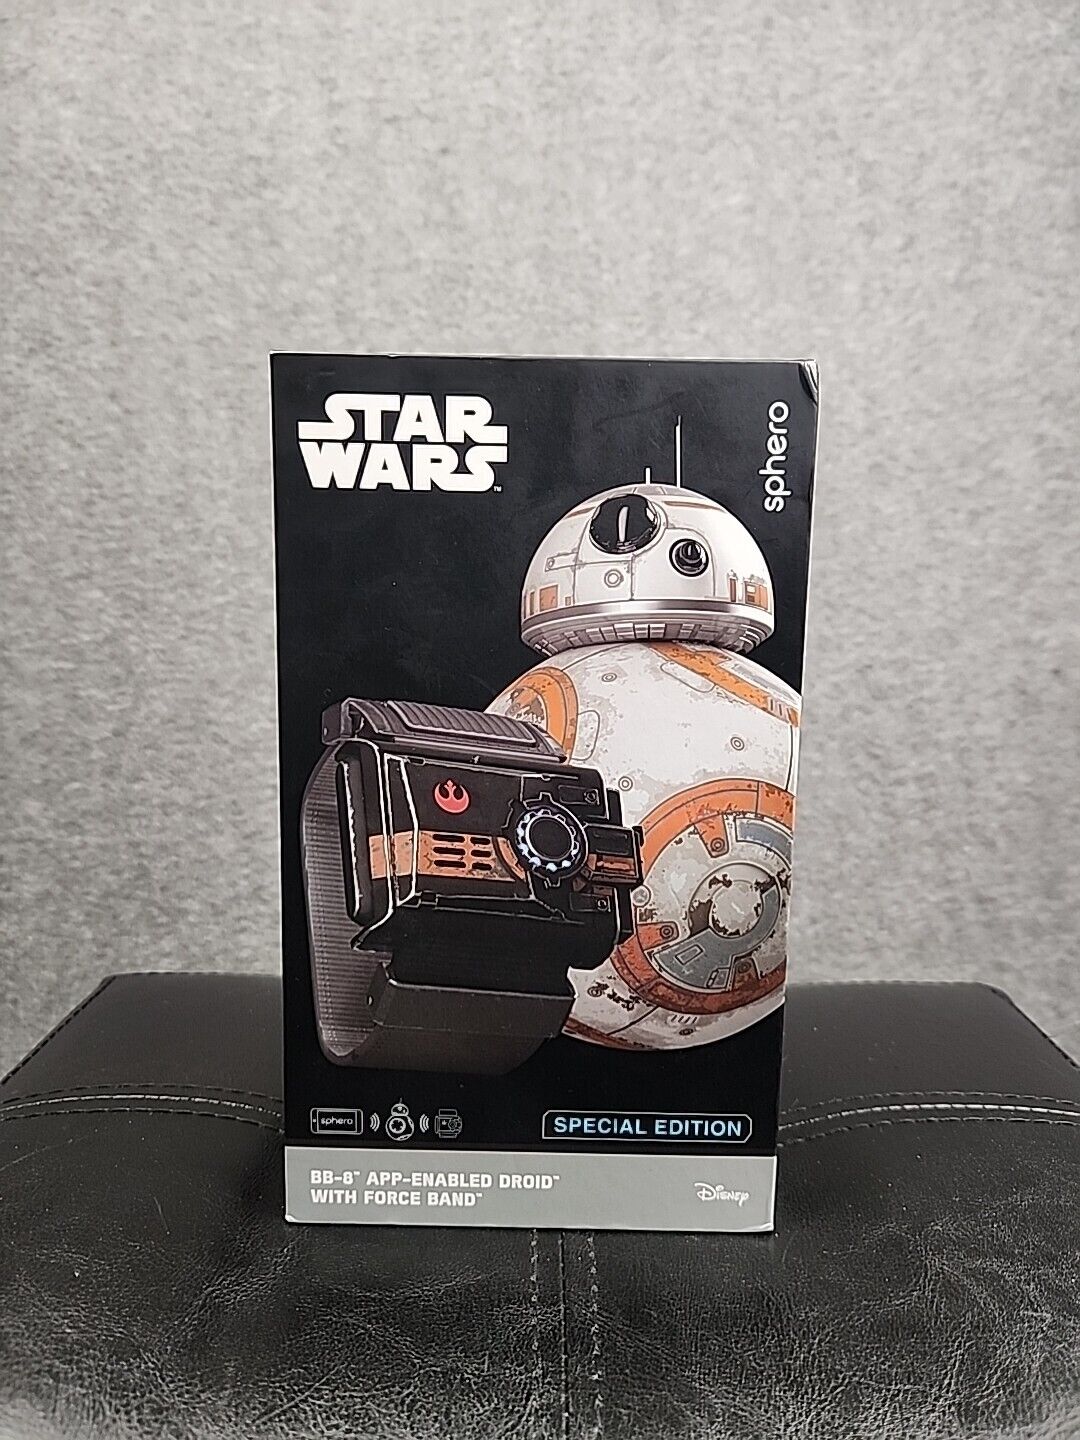 Disney Sphero Star Wars BB-8 App Enabled Droid with Force Band Special Edition